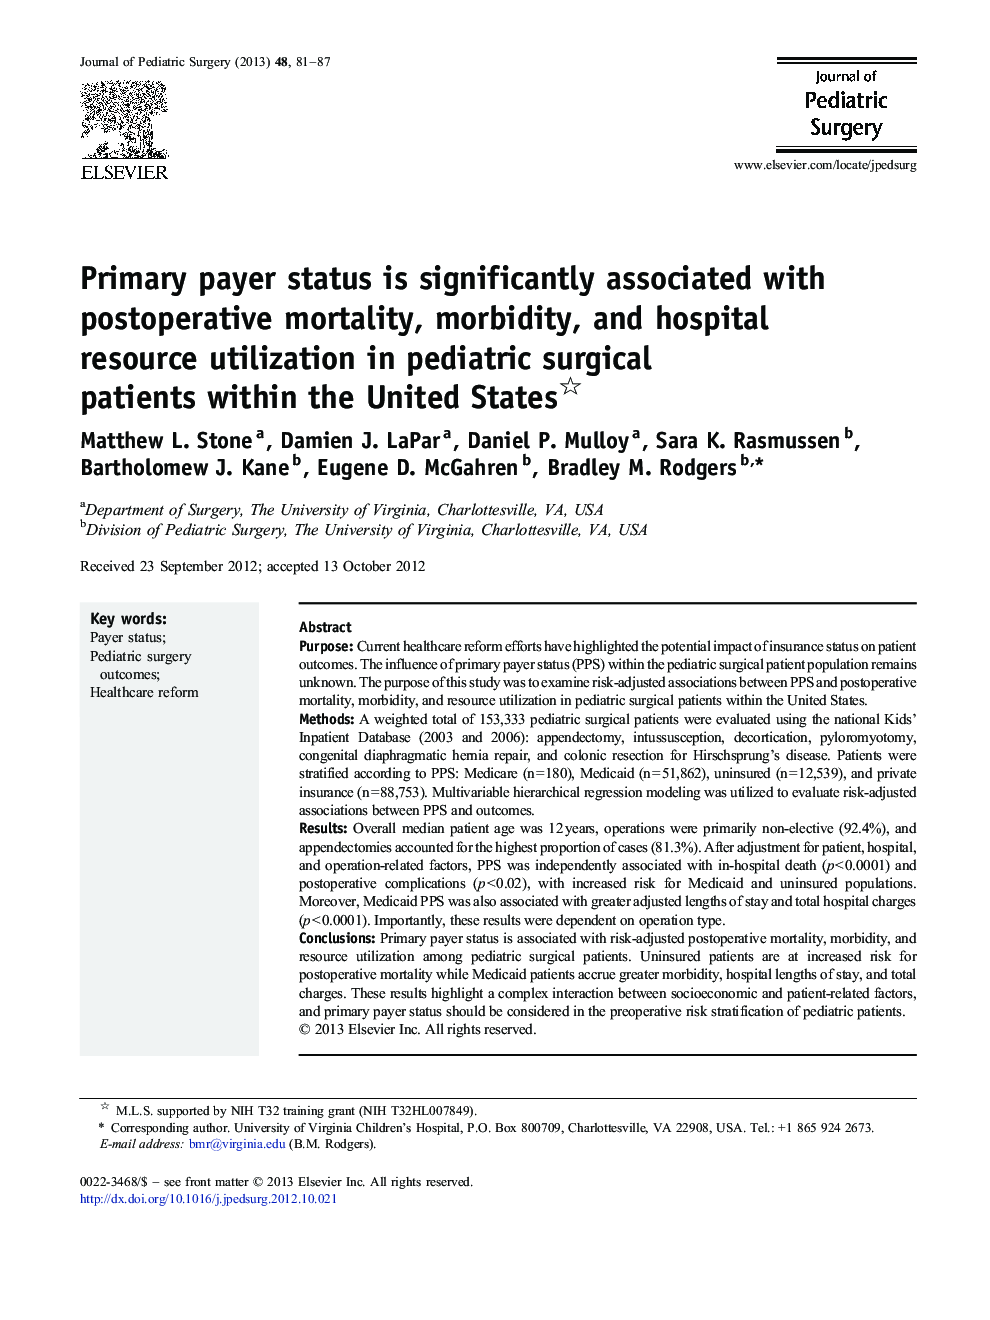 Primary payer status is significantly associated with postoperative mortality, morbidity, and hospital resource utilization in pediatric surgical patients within the United States 